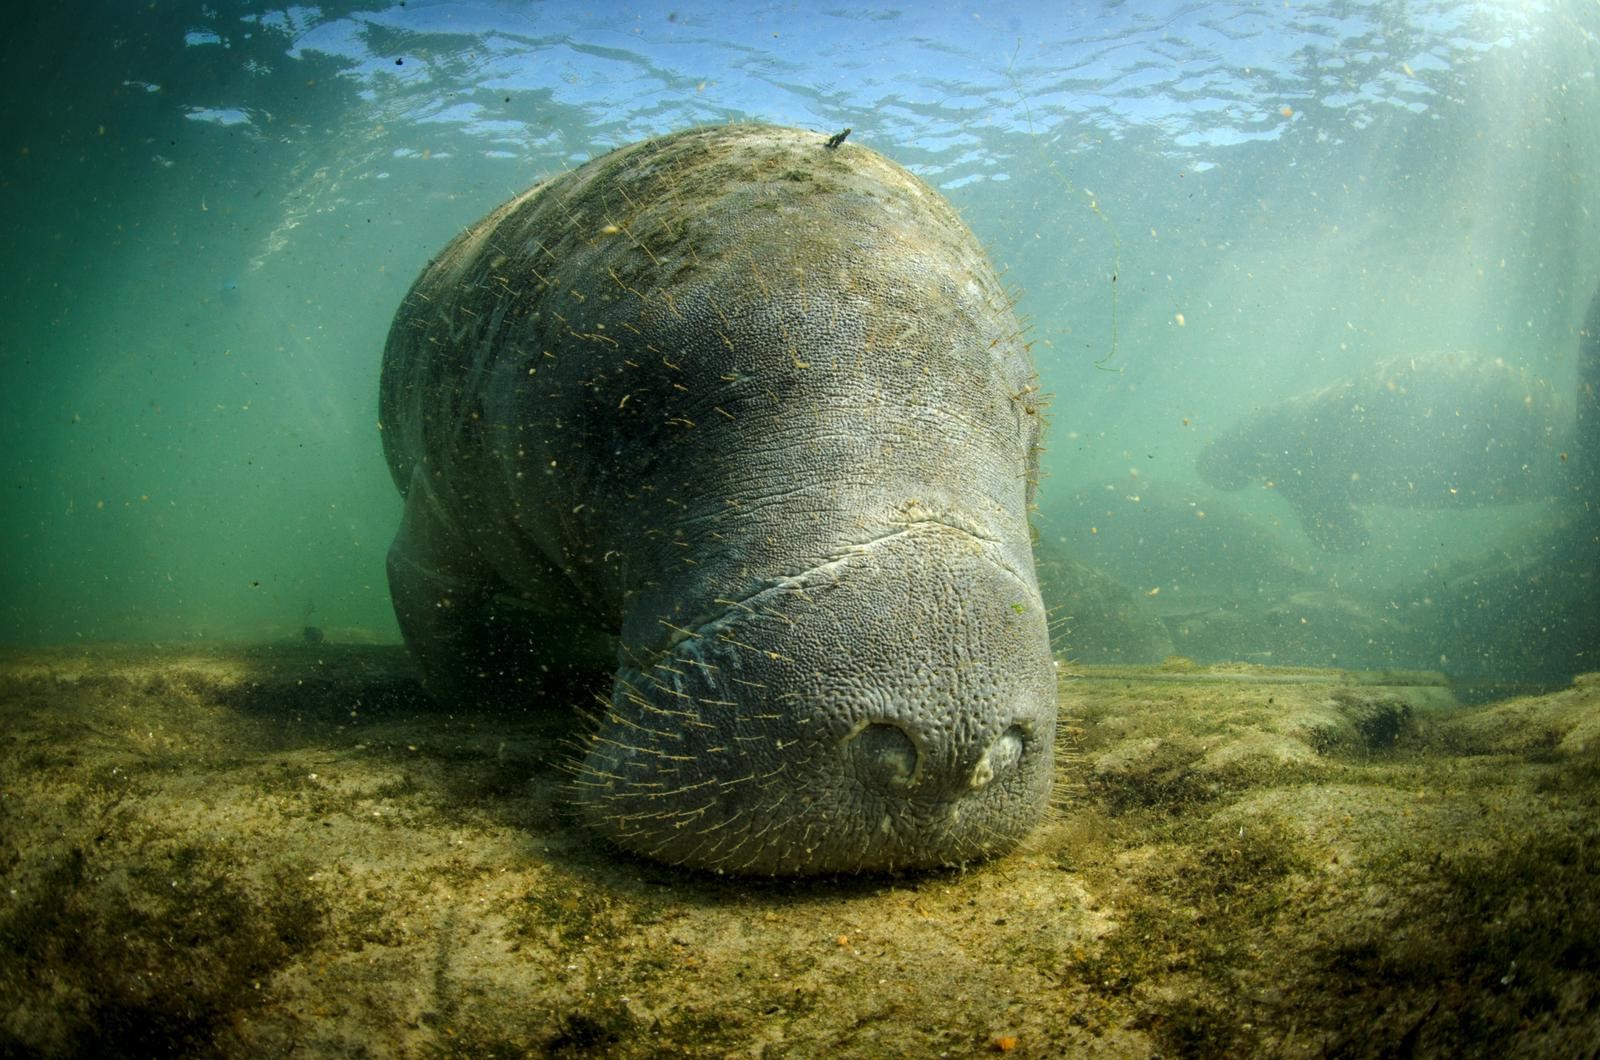 Environment Groups Want EPA Do More To Protect Manatees, Wildlife